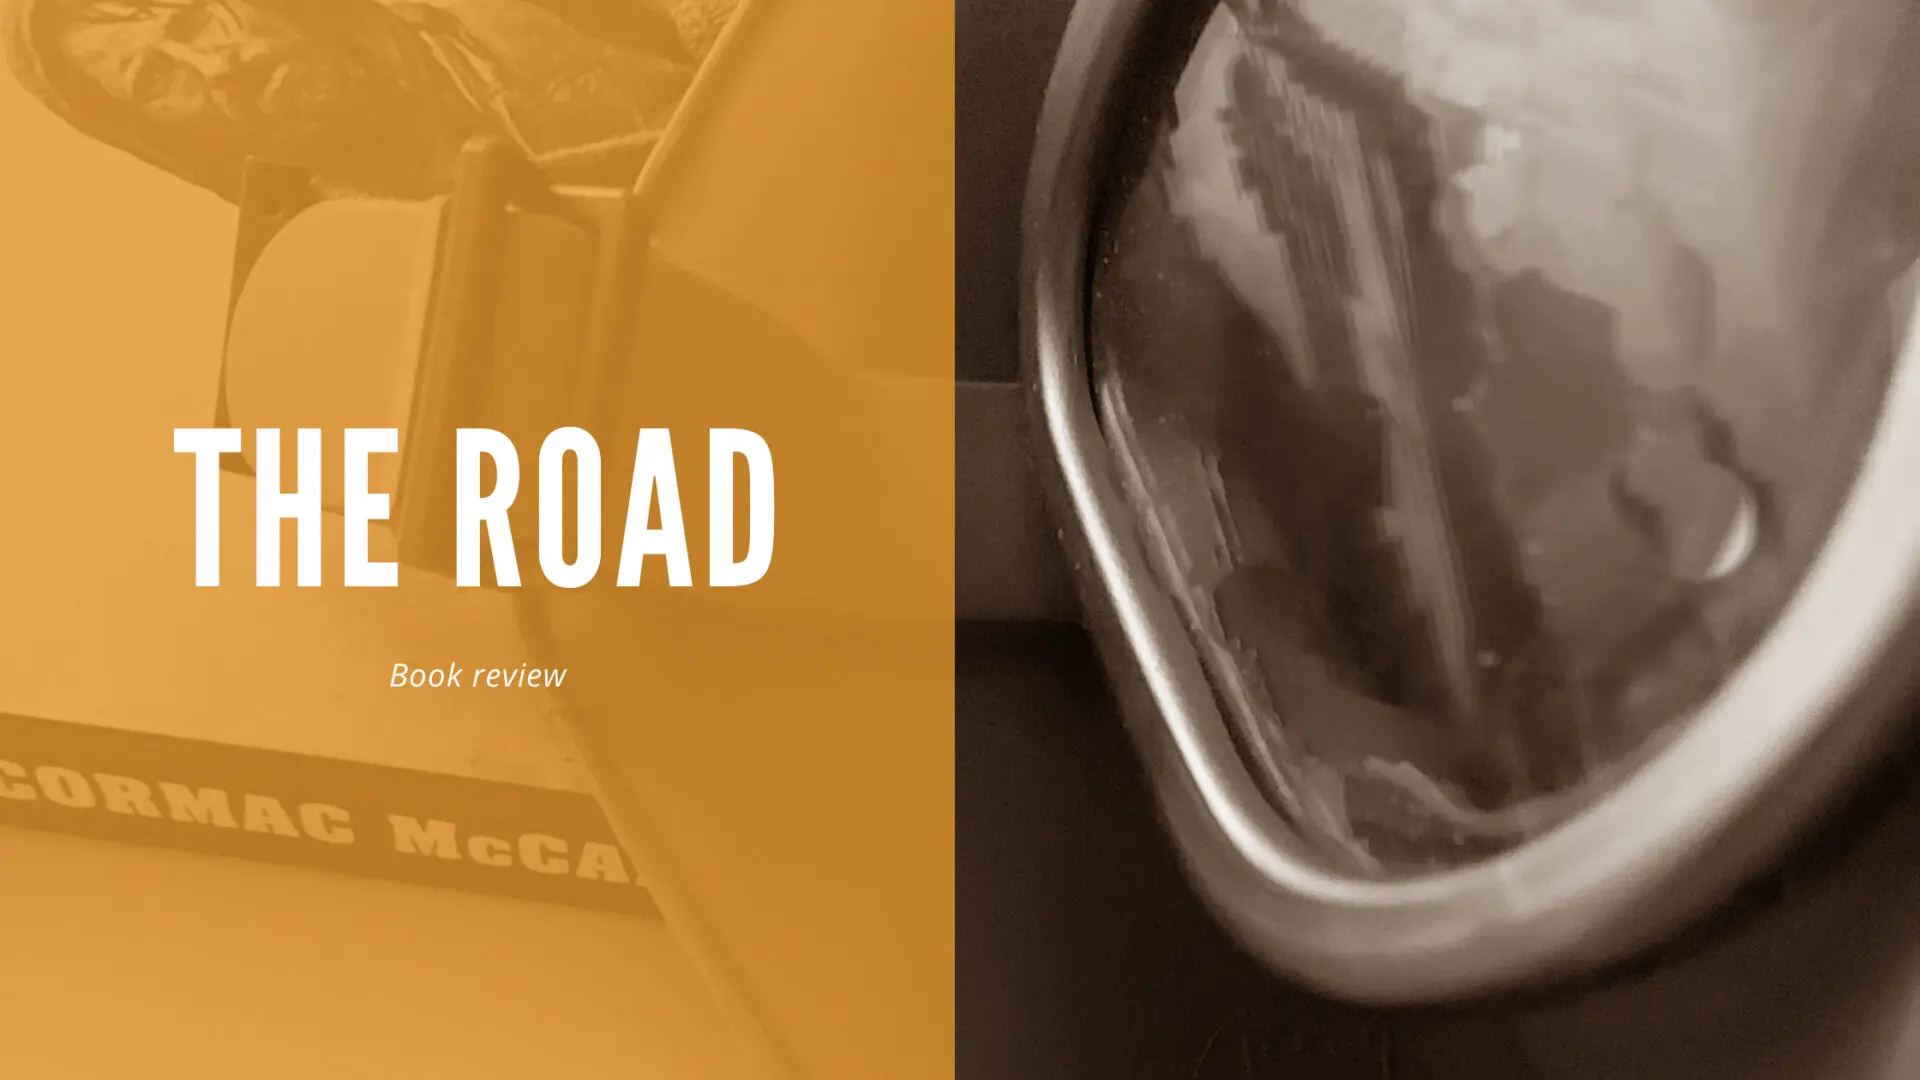 The Road book review